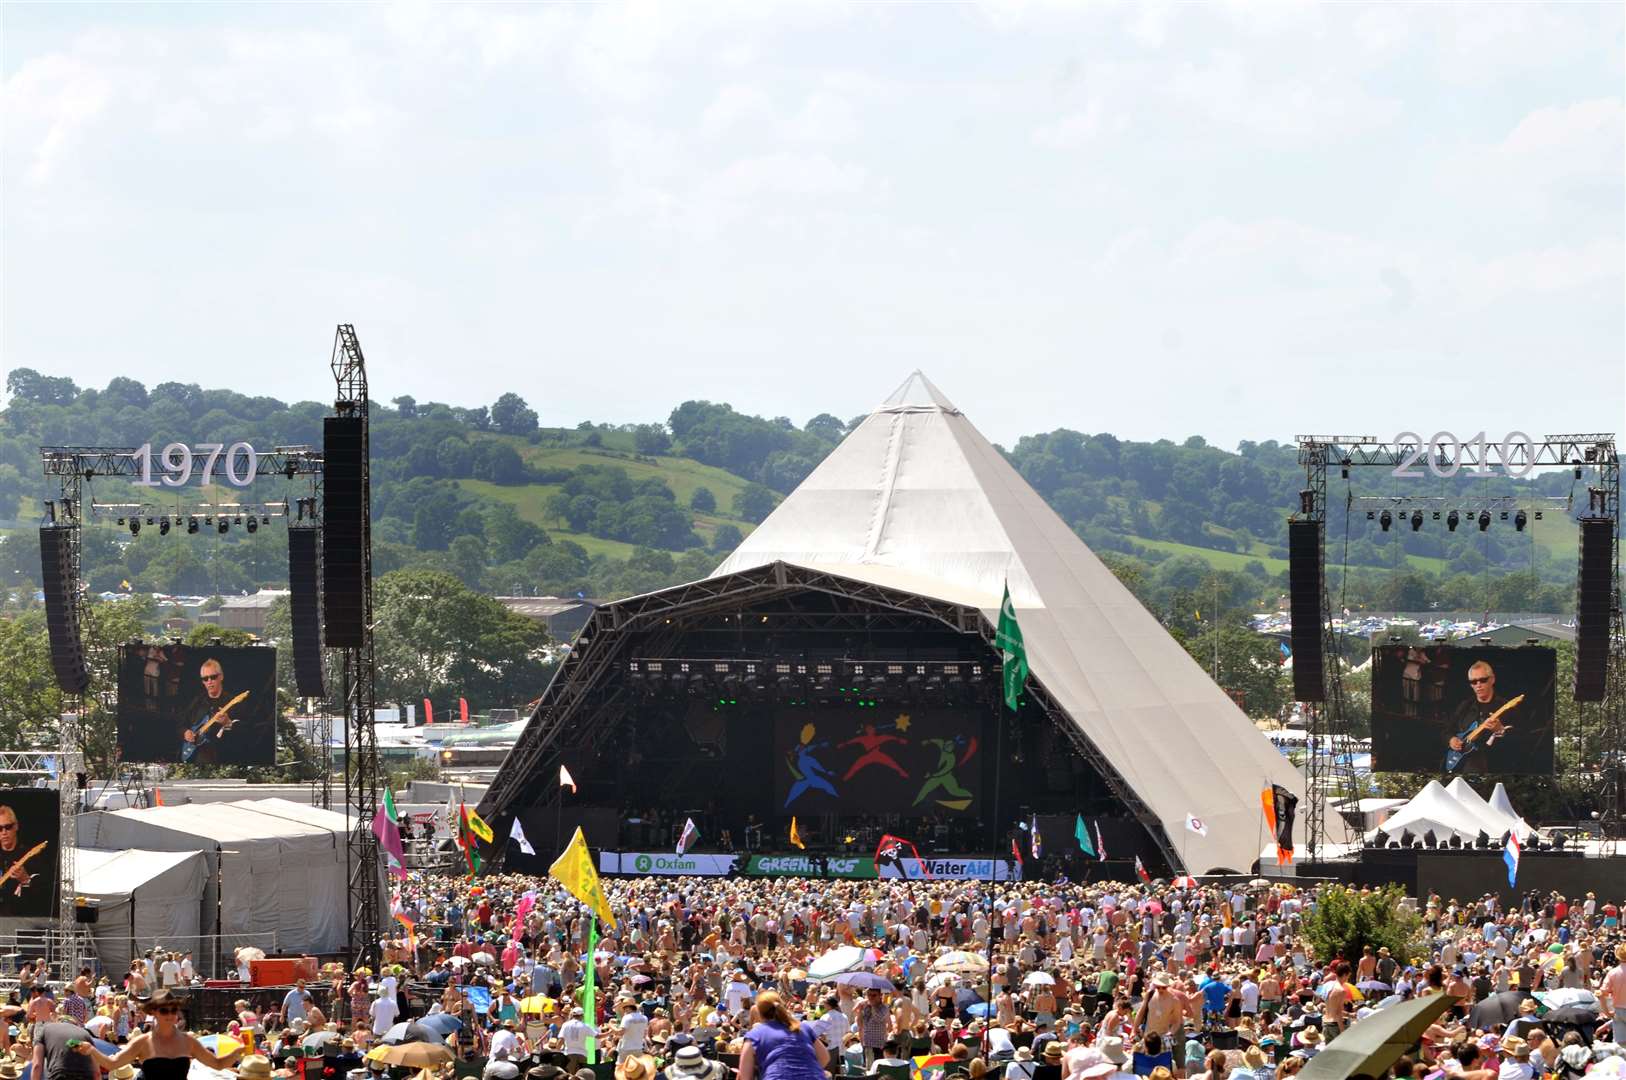 Glastonbury is famous the world over for its global headliners